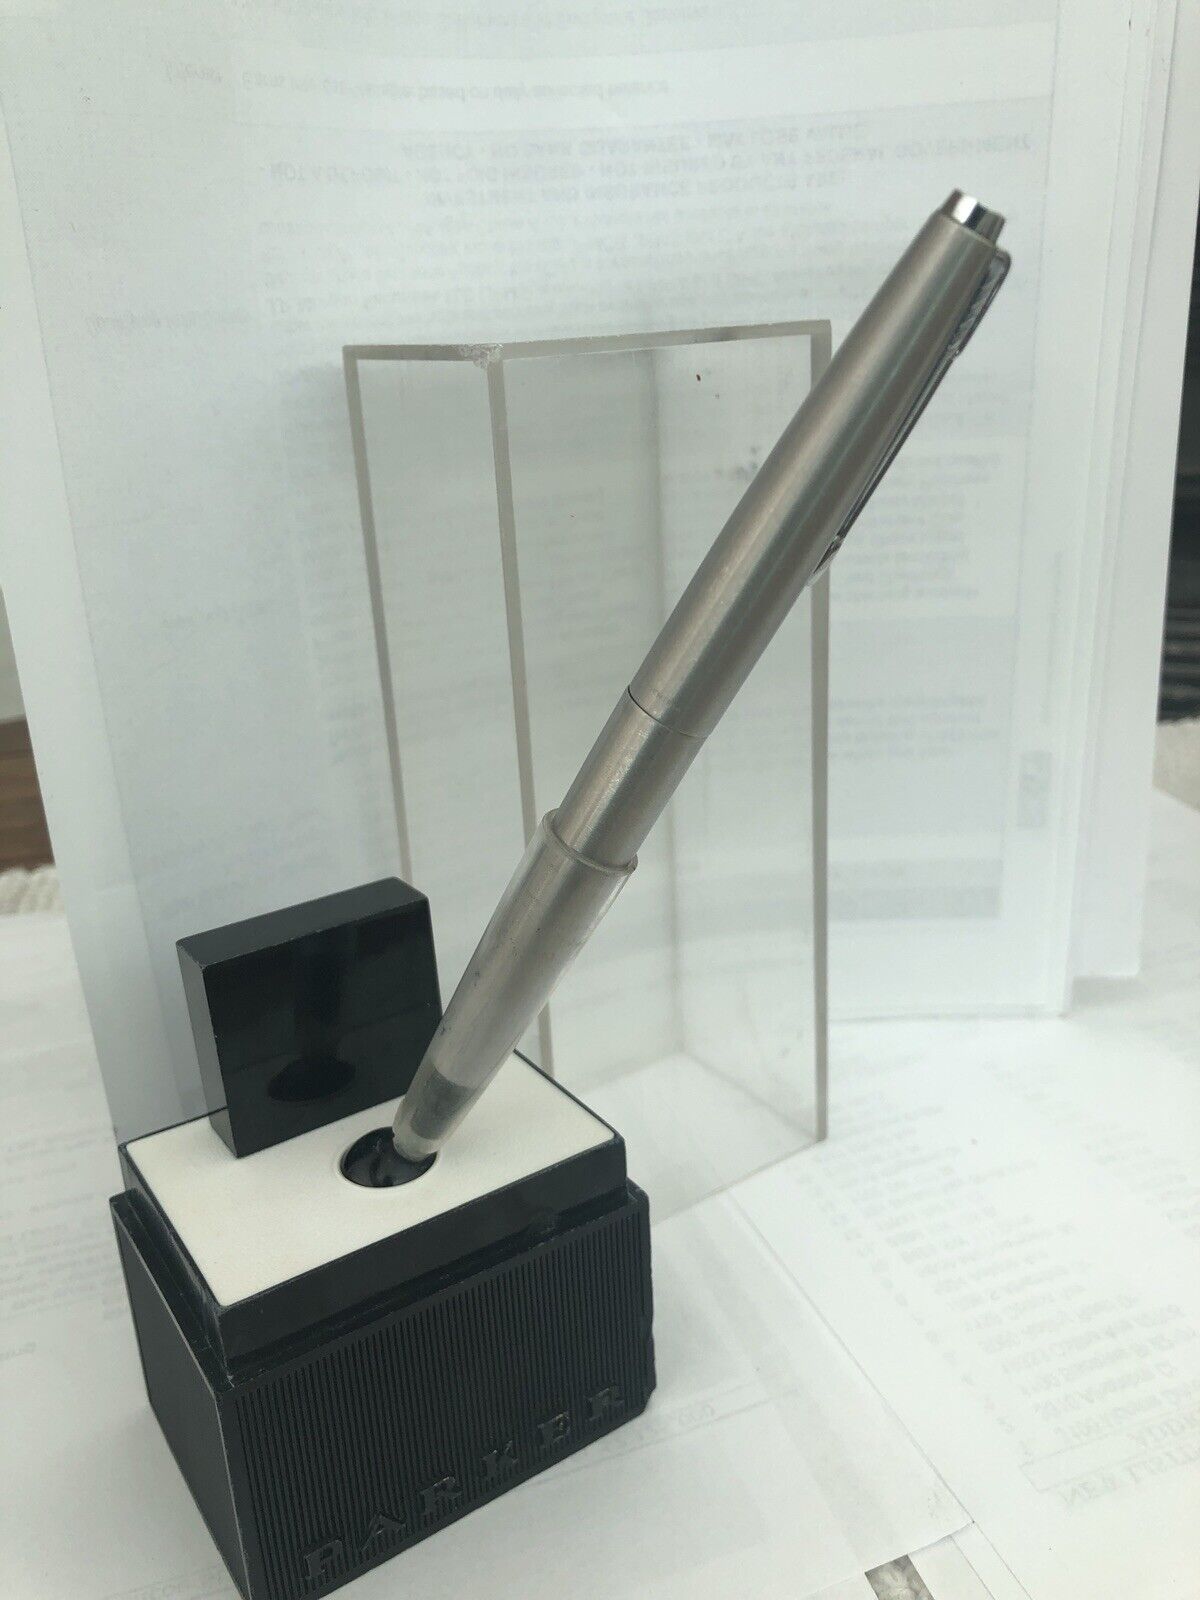 PARKER VINTAGE CARTRIDGE FOUNTAIN PEN WITH STAND AND BOX - 1968 stainless steel